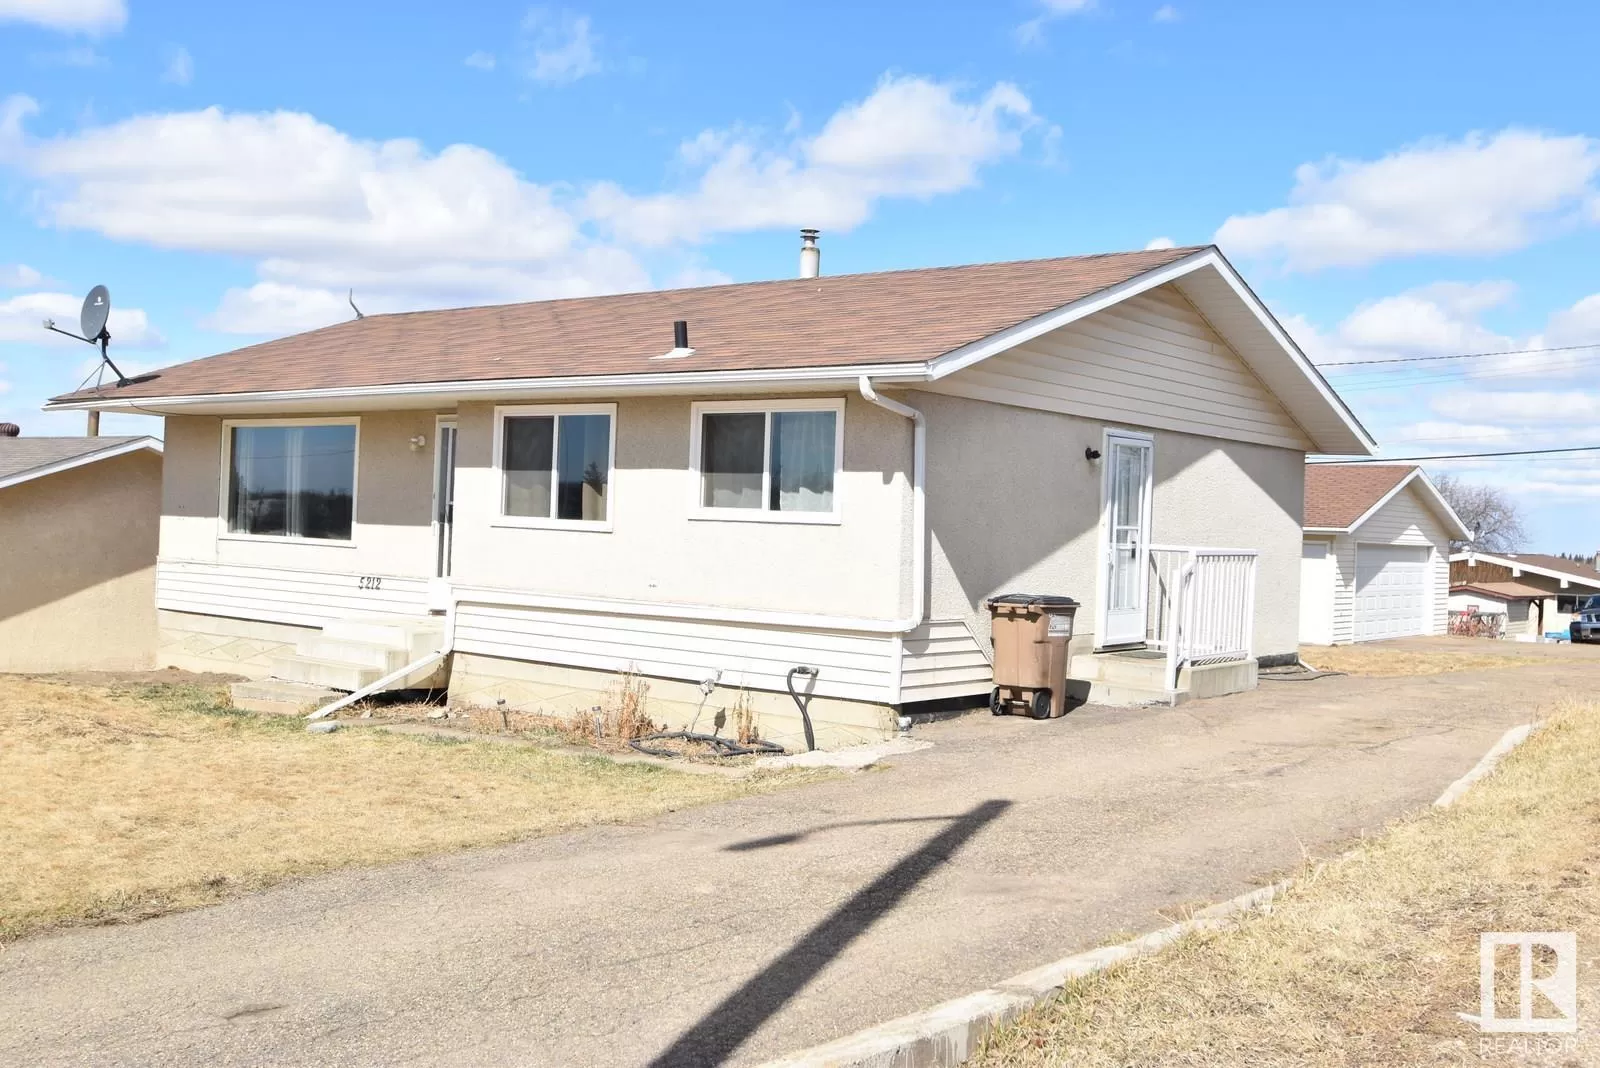 House for rent: 5212 Hospital Ave, Boyle, Alberta T0A 0M0